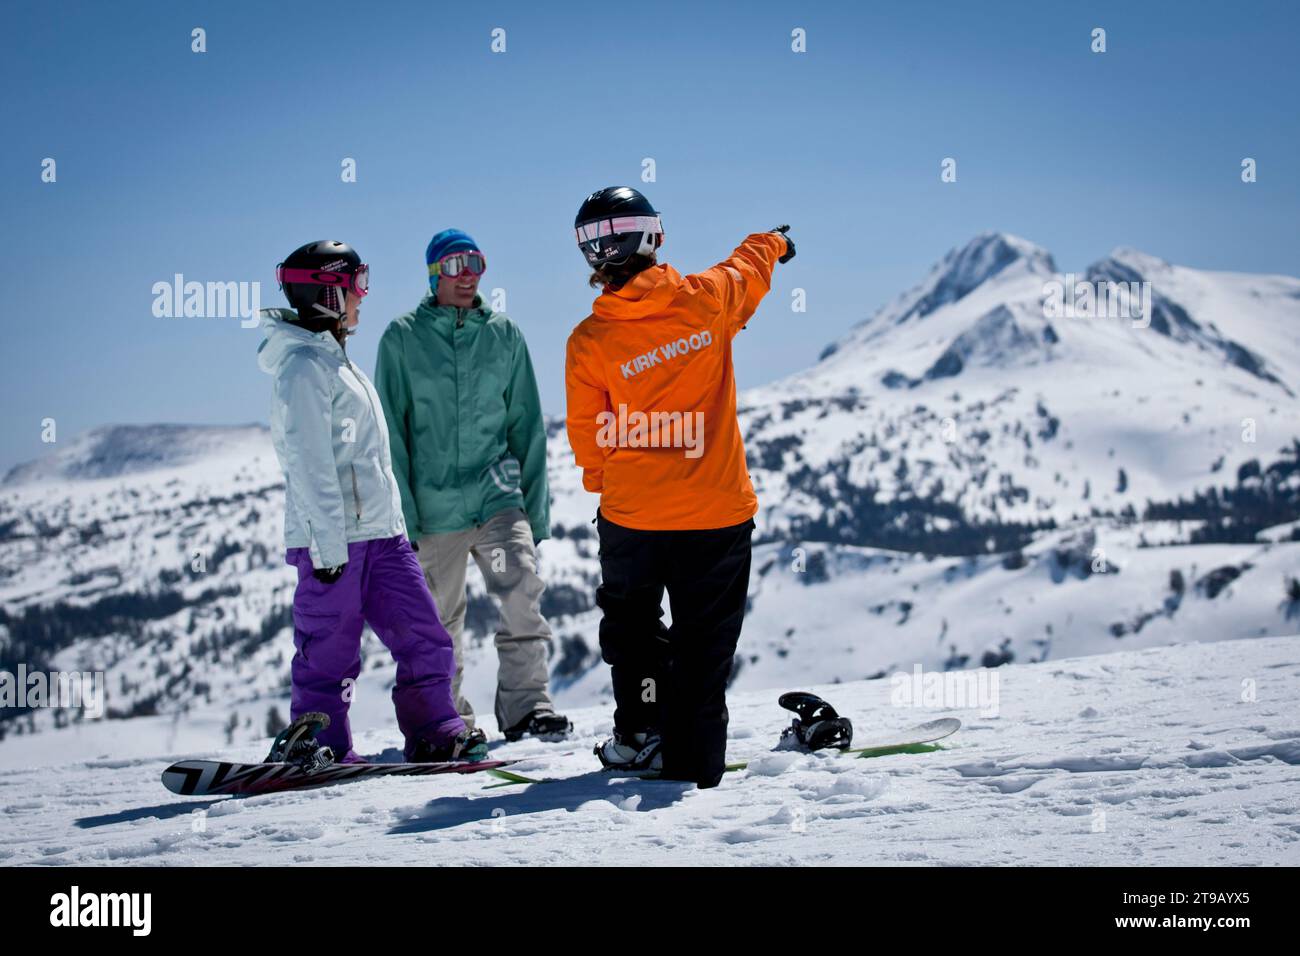 Snowboard instructor giving a lesson at a ski resort. Stock Photo